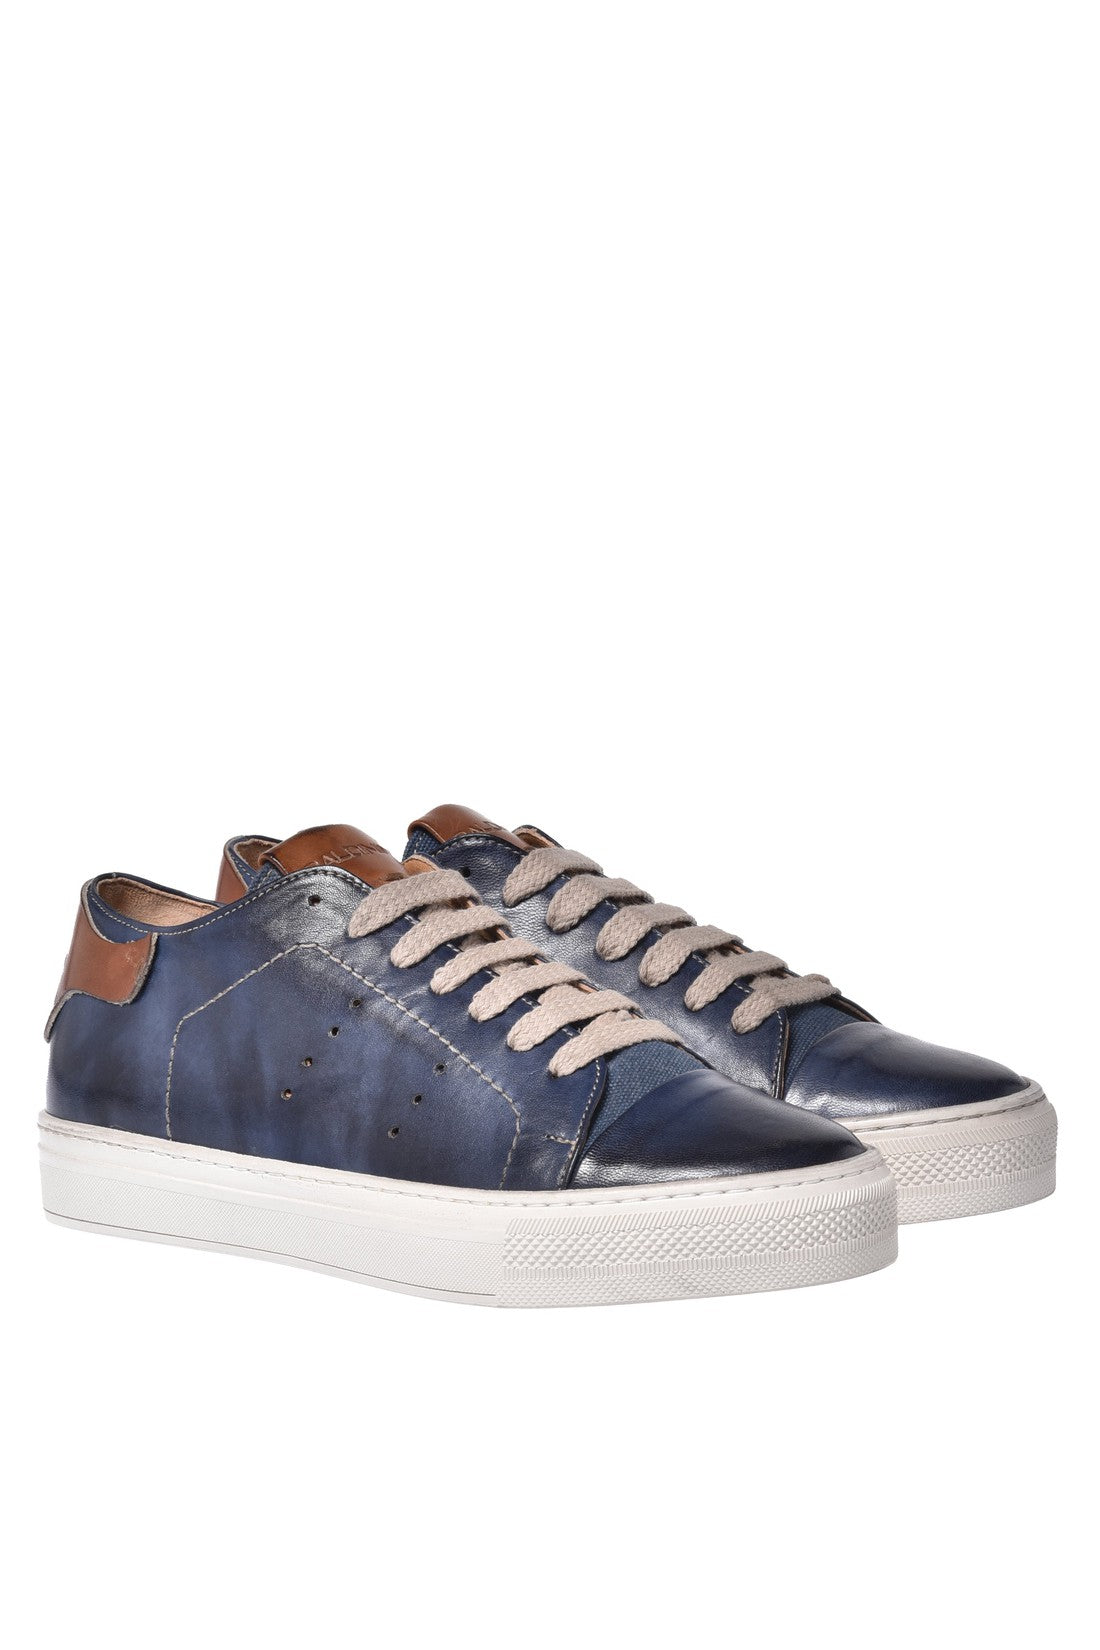 Sneaker in blue calfskin and canvas